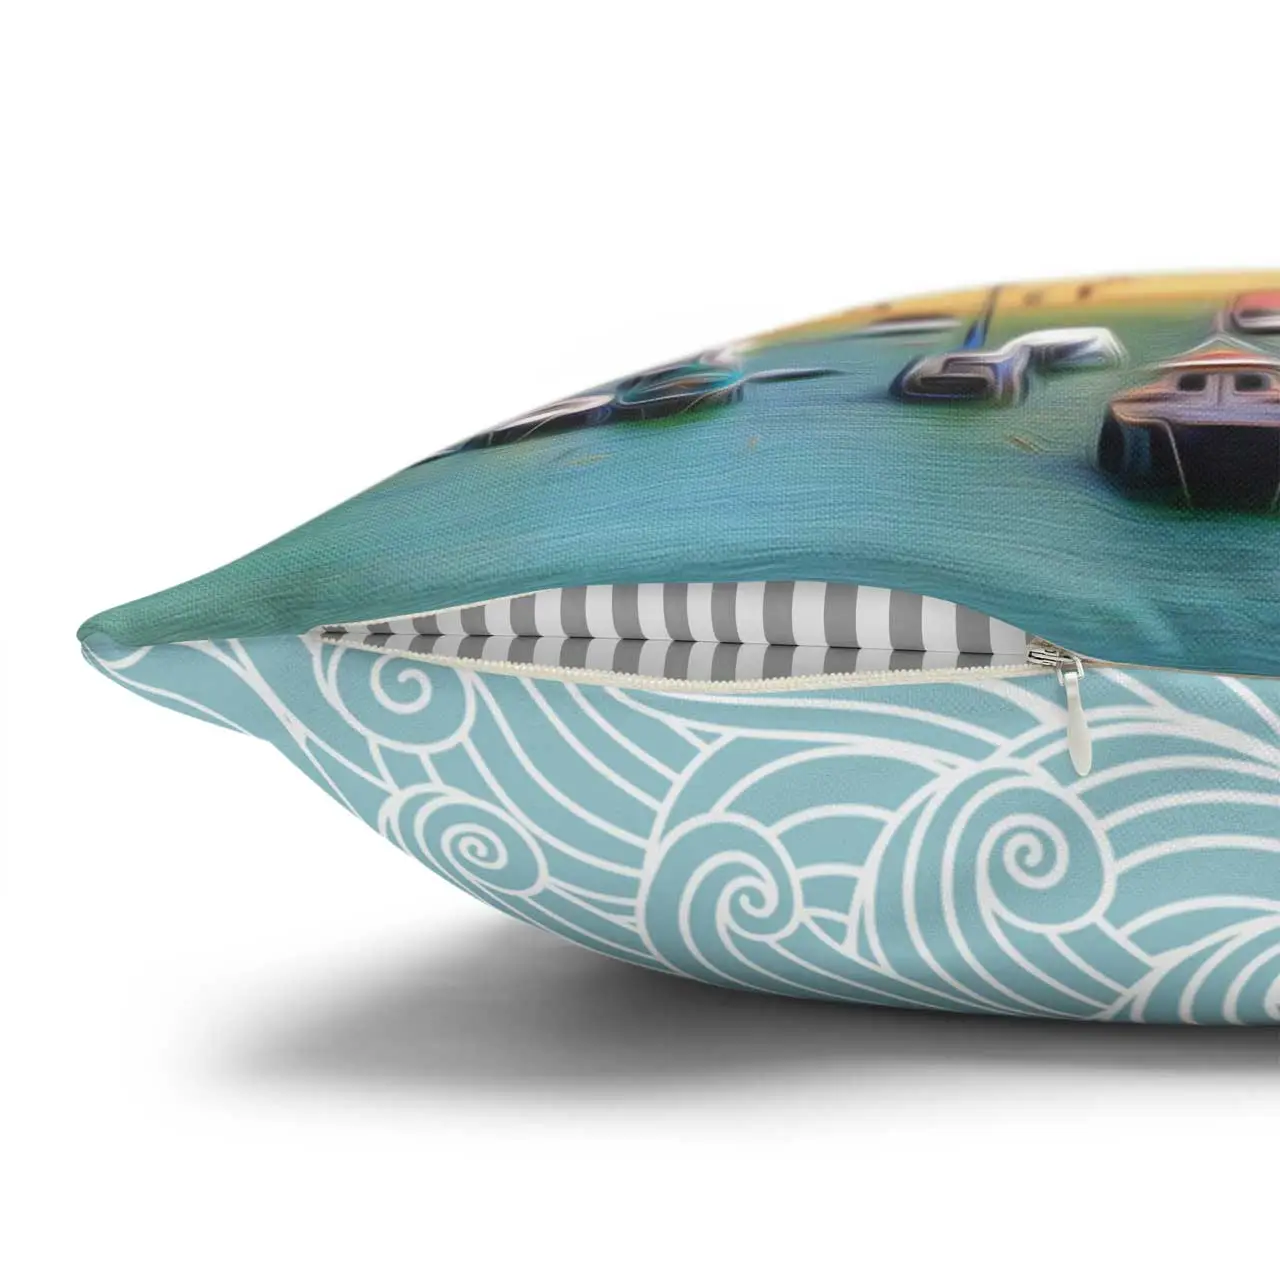 Around Tenby Tenby Harbour Beach and Aqua Waves Cushion Cover